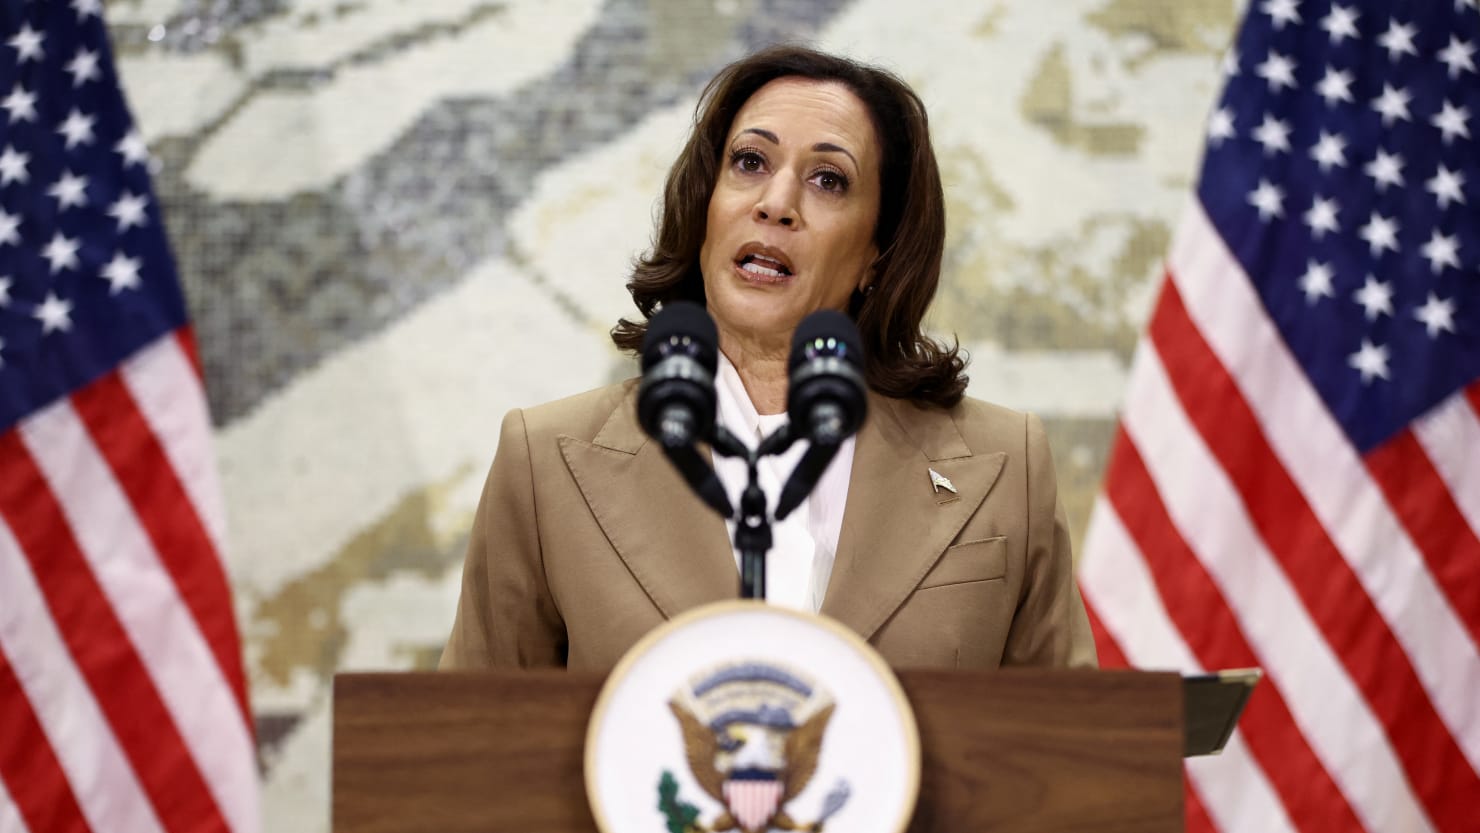 The U.S. Won’t Permit Israel to Forcibly Displace Palestinians from Gaza, Kamala Harris Says